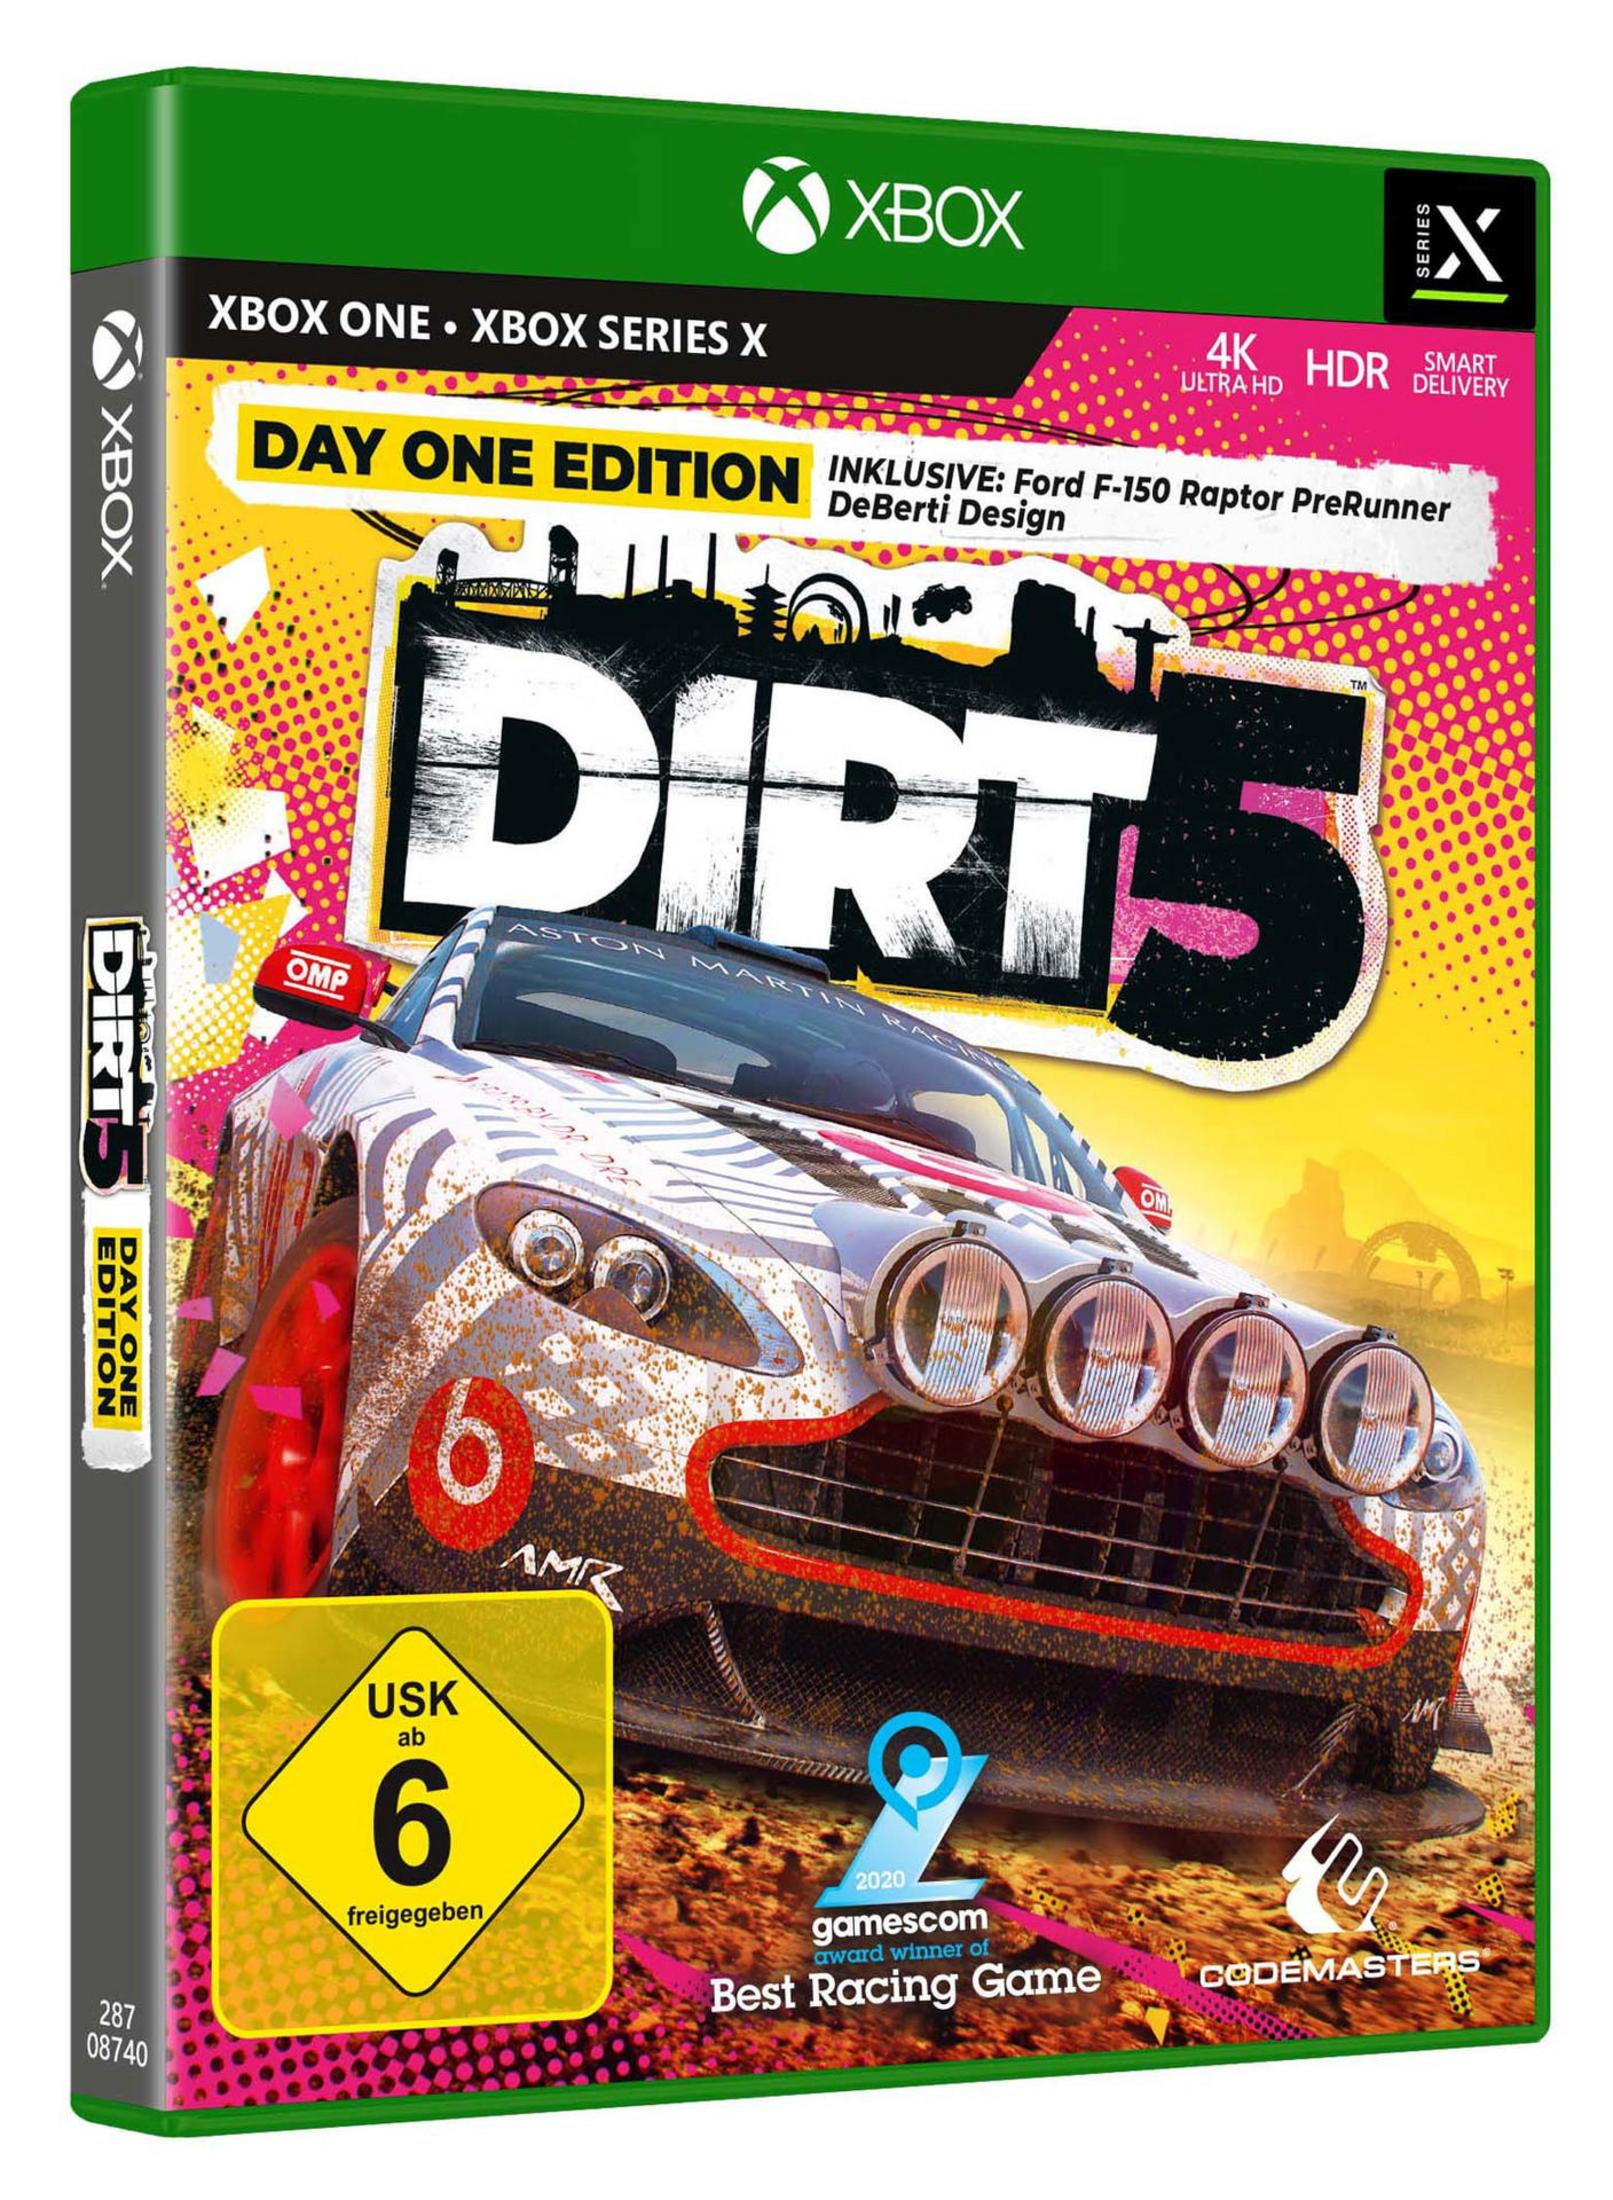 One [Xbox - One] DIRT Edition - Day 5